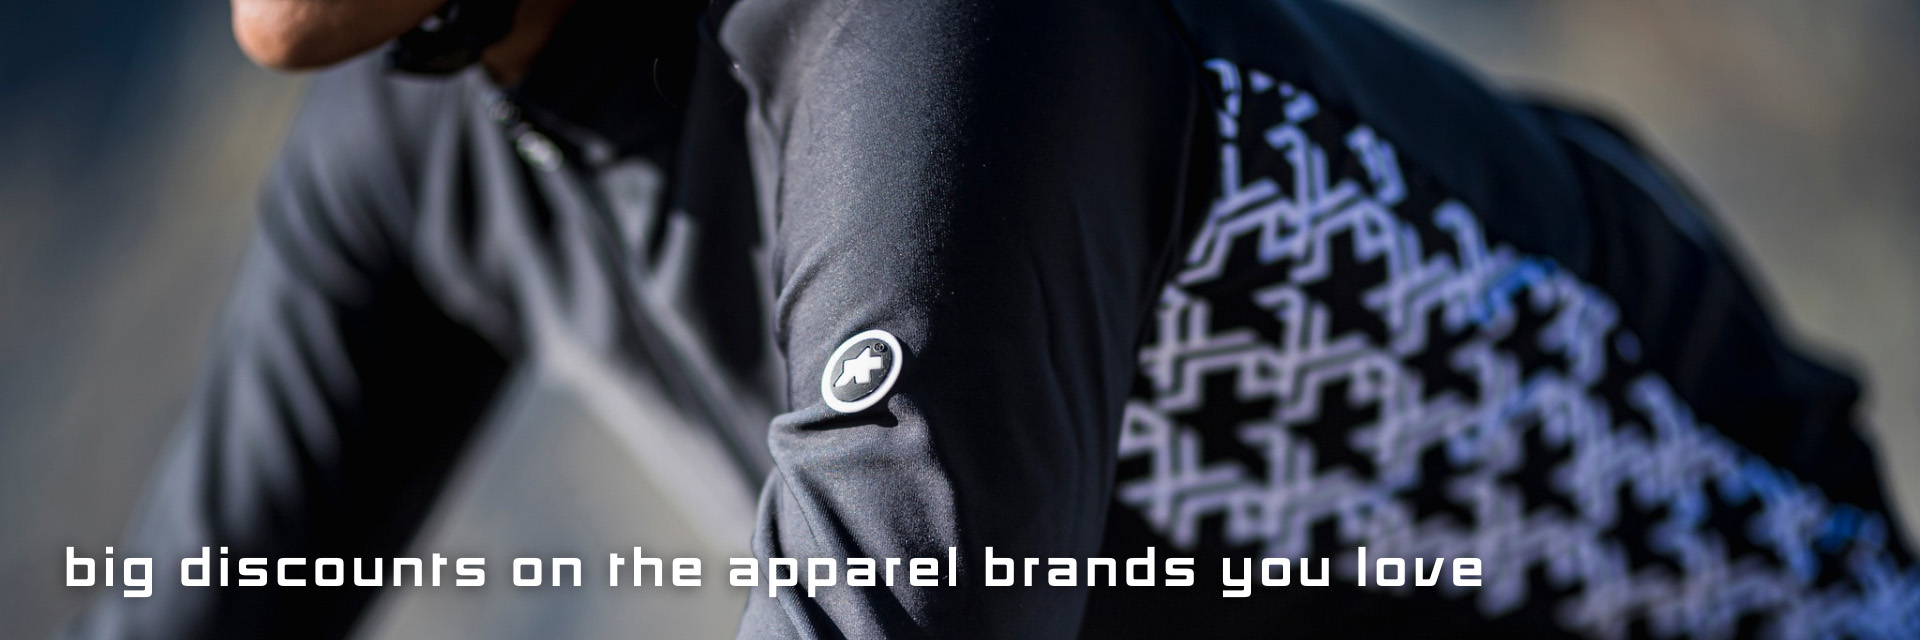 big discounts on the apparel brands you love